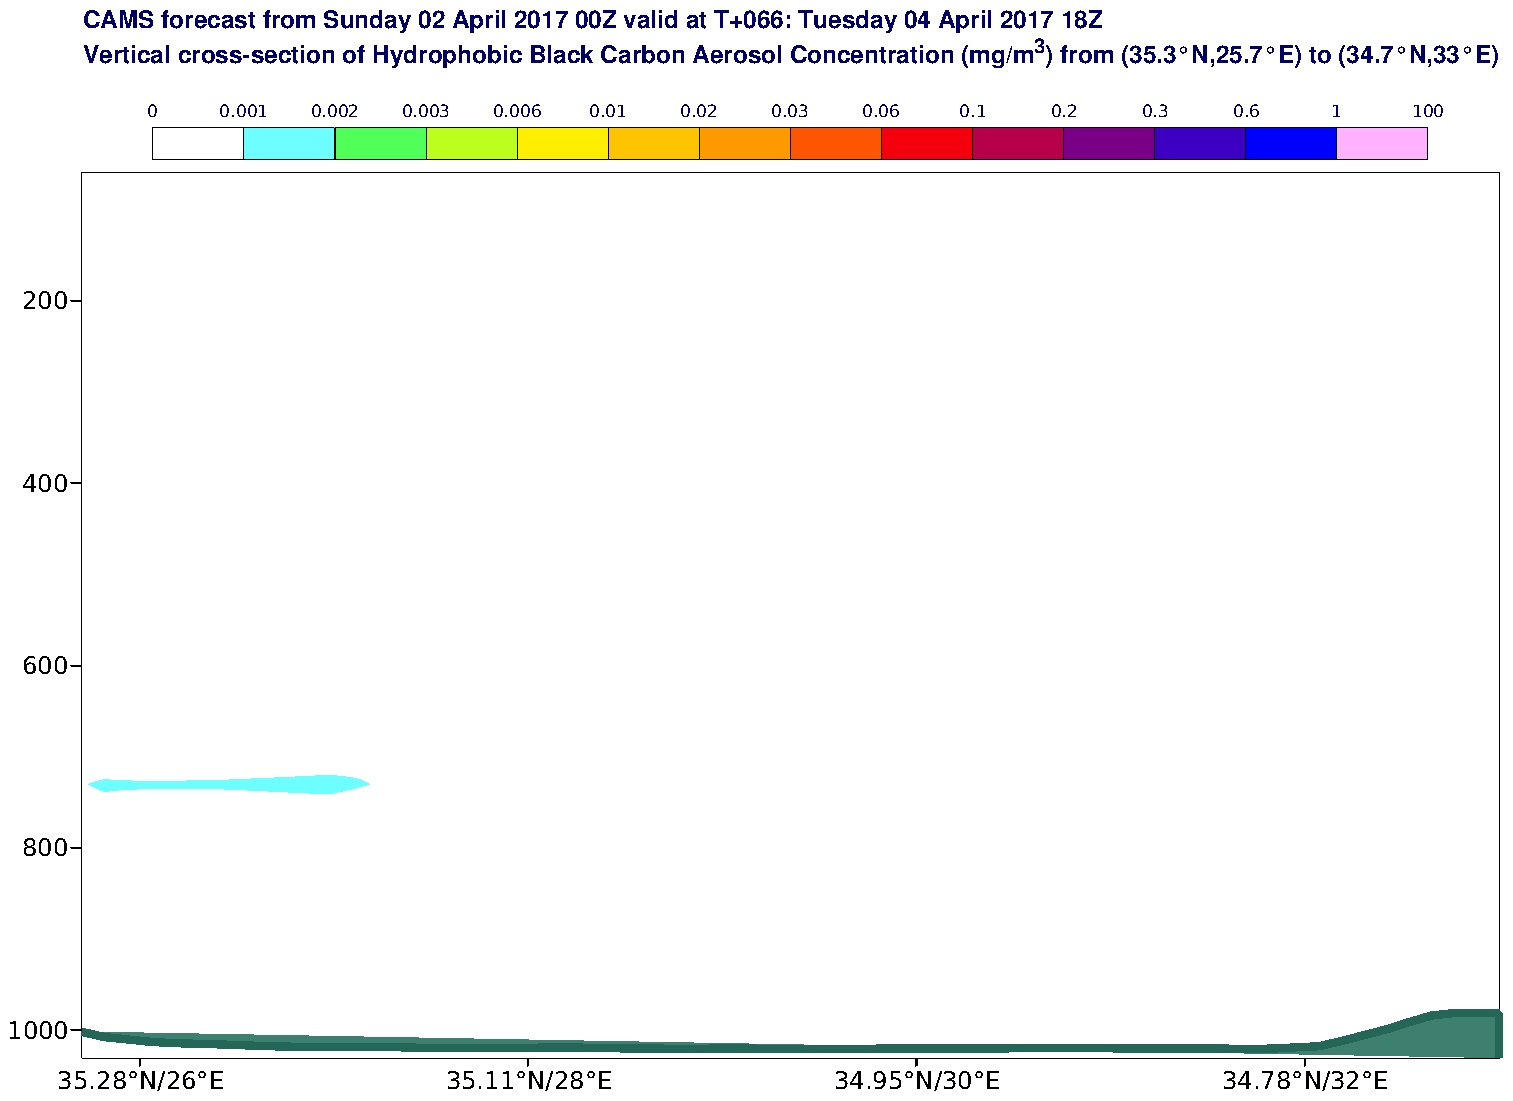 Vertical cross-section of Hydrophobic Black Carbon Aerosol Concentration (mg/m3) valid at T66 - 2017-04-04 18:00